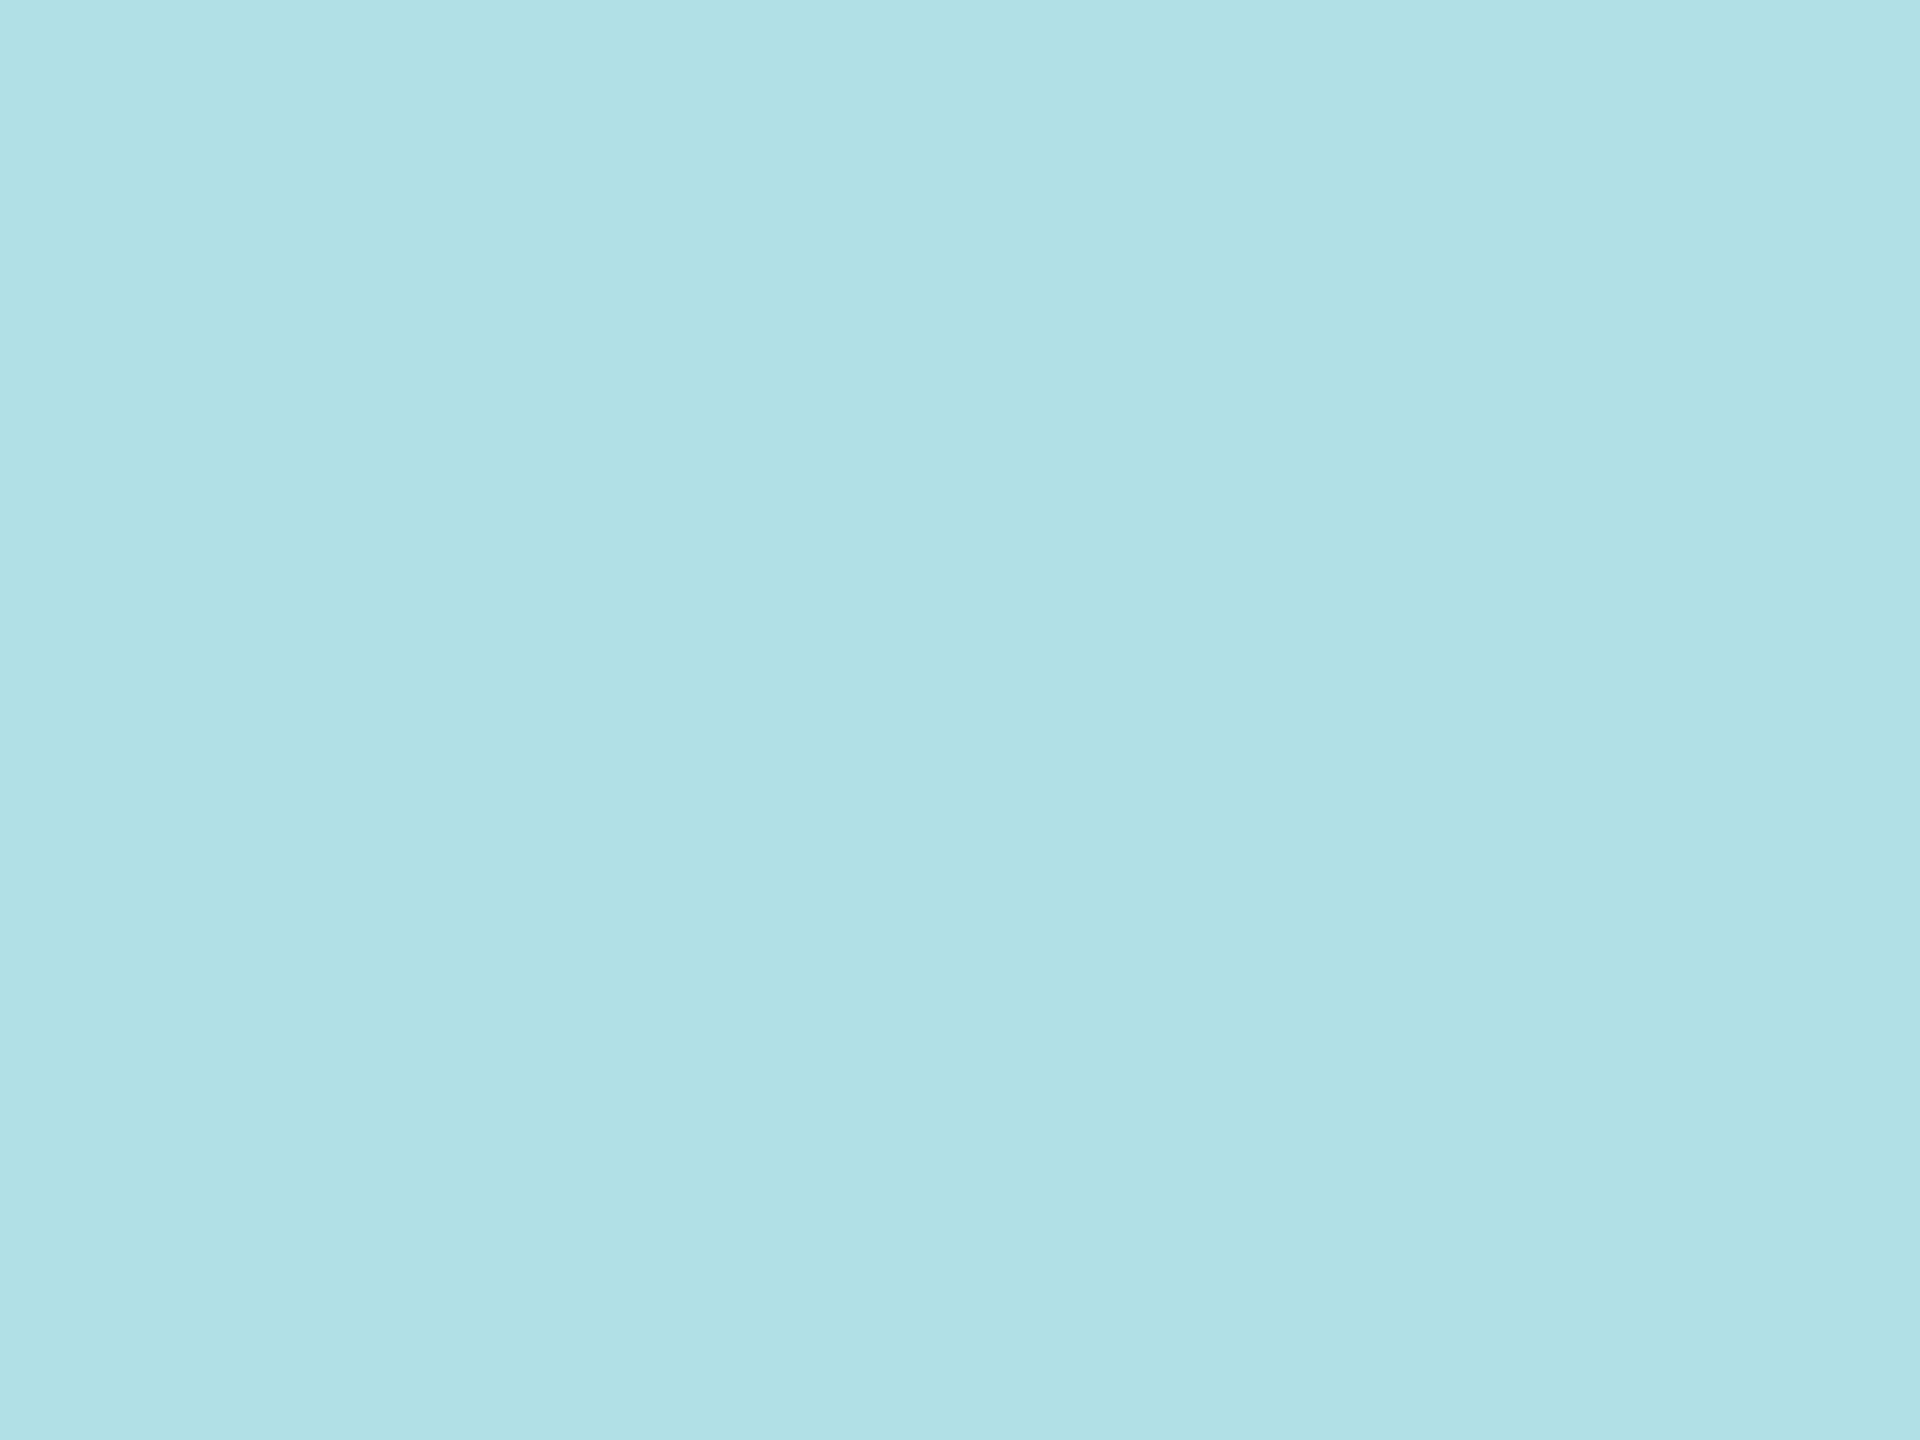 Solid Arctic Blue Color Background